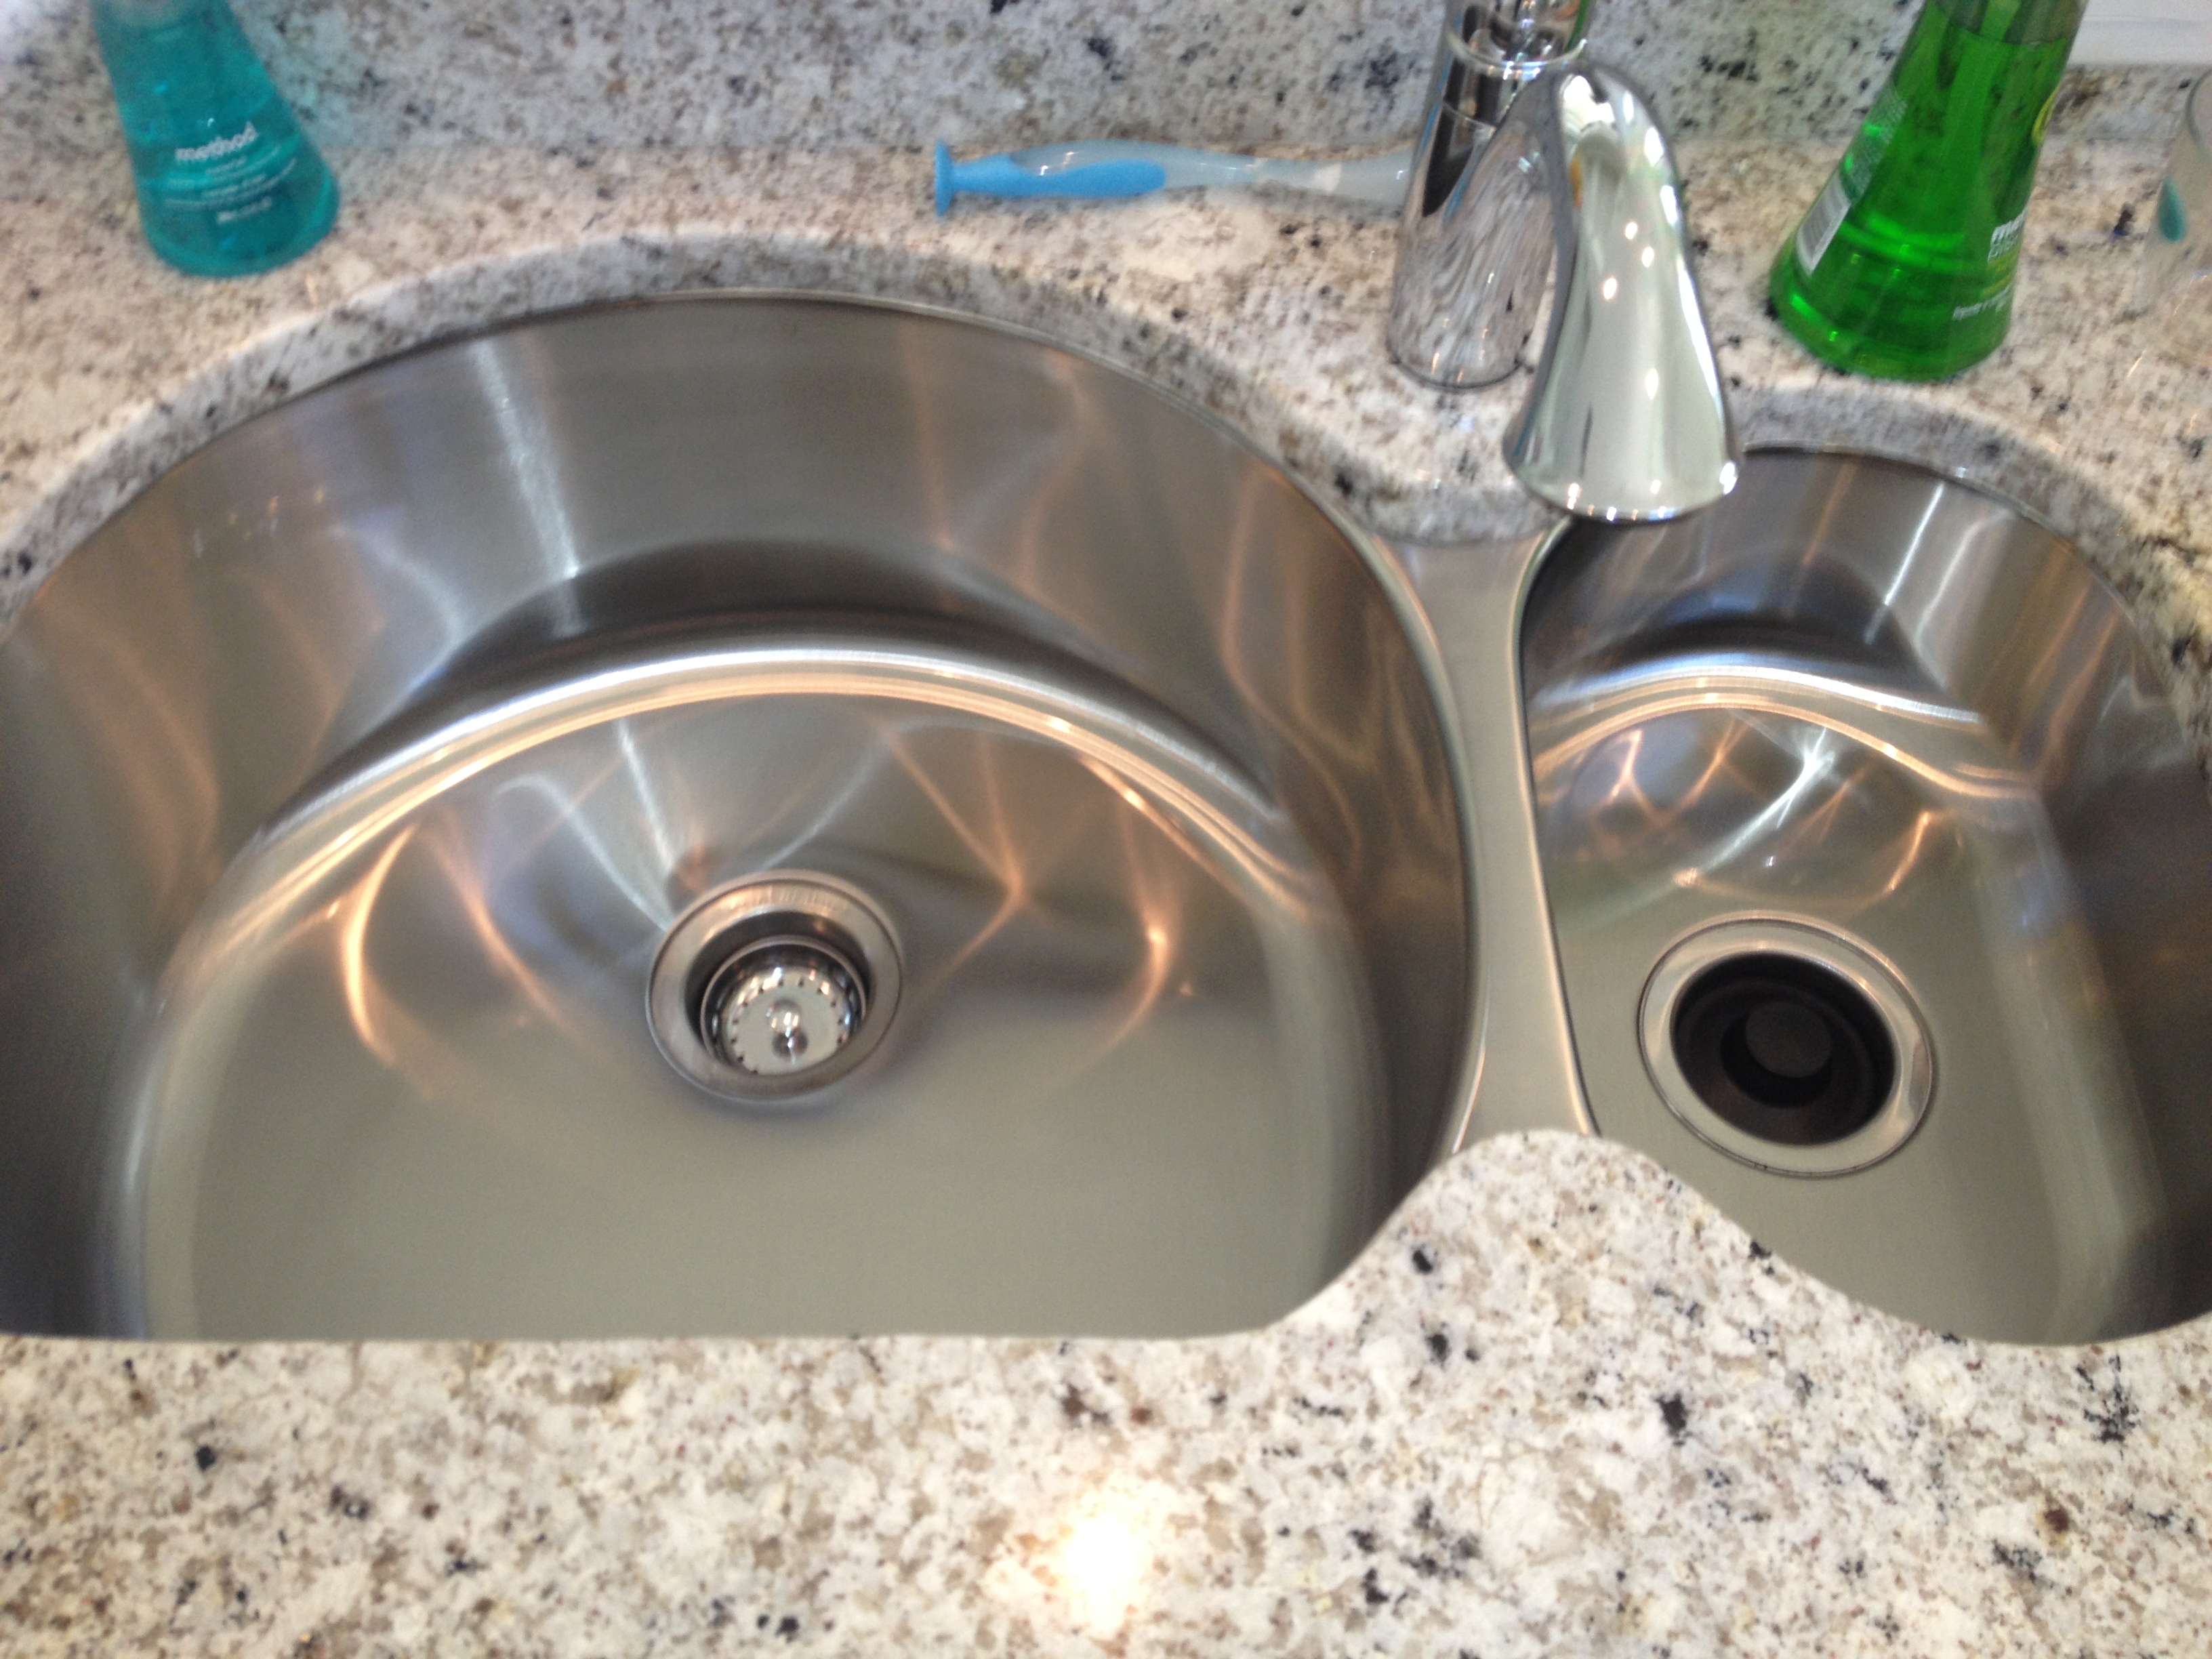 Repairing & Refinishing Stainless Steel Scratches in Scottsdale